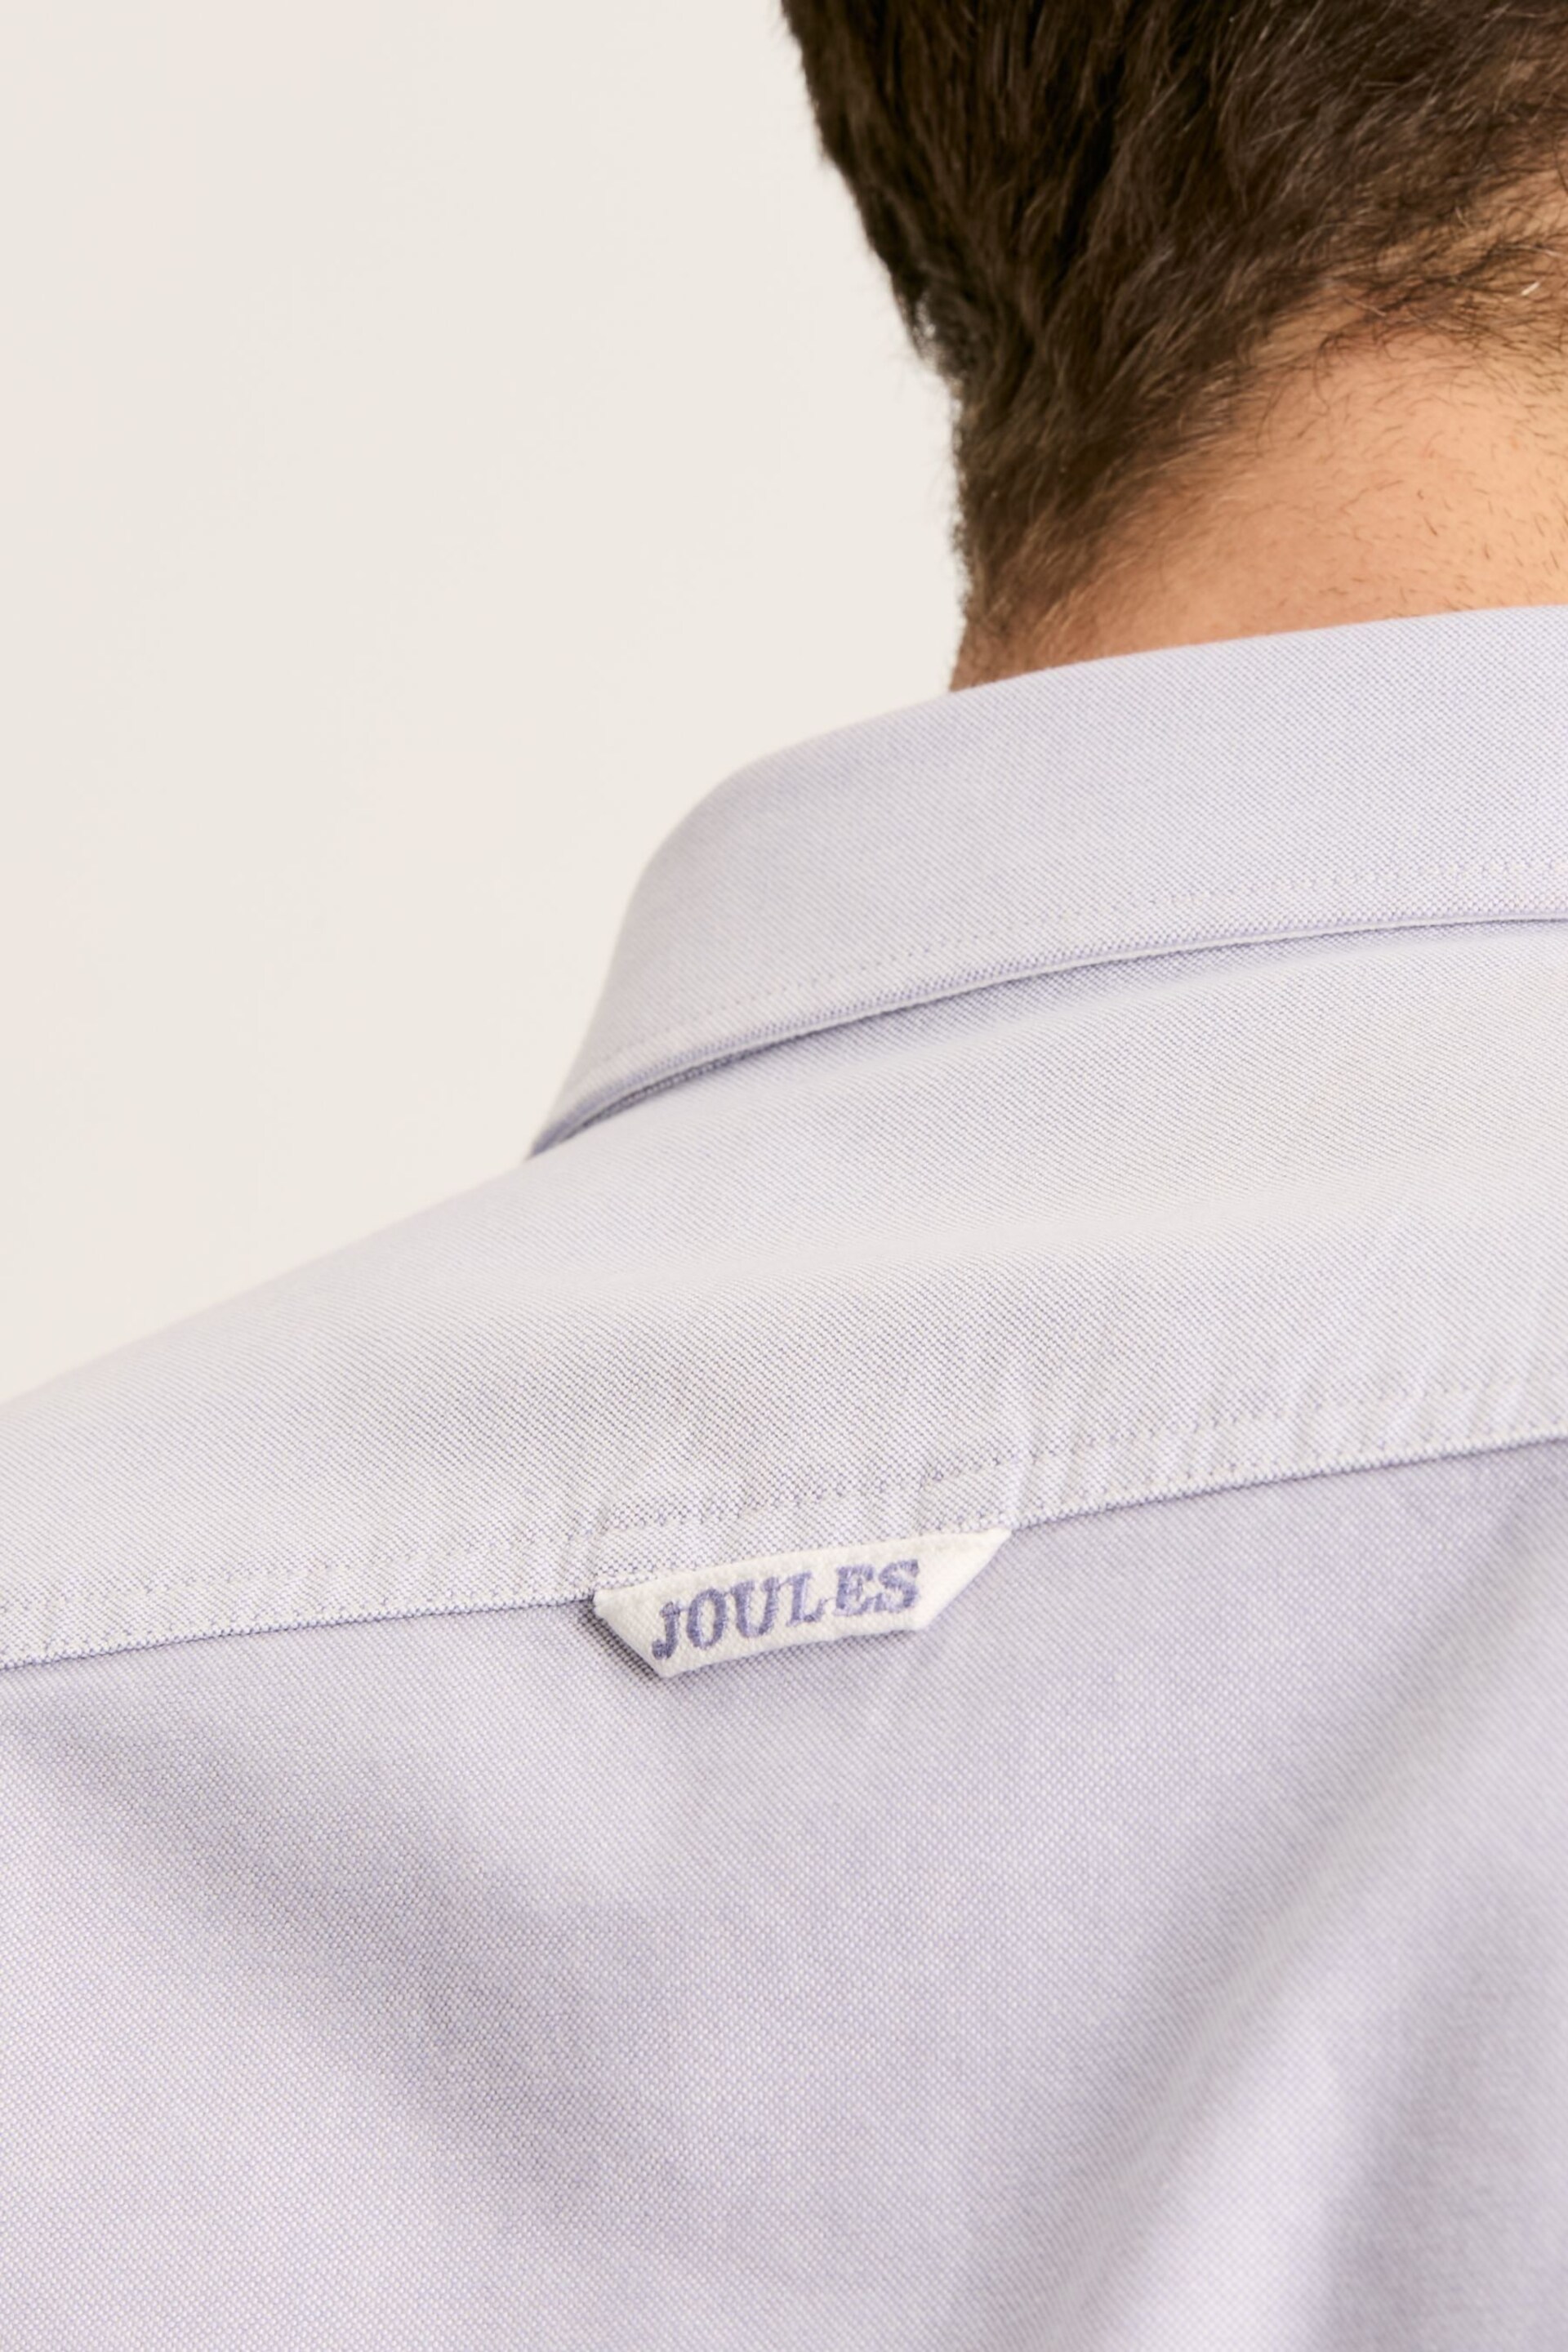 Joules Oxford Purple Classic Fit Shirt - Image 6 of 7